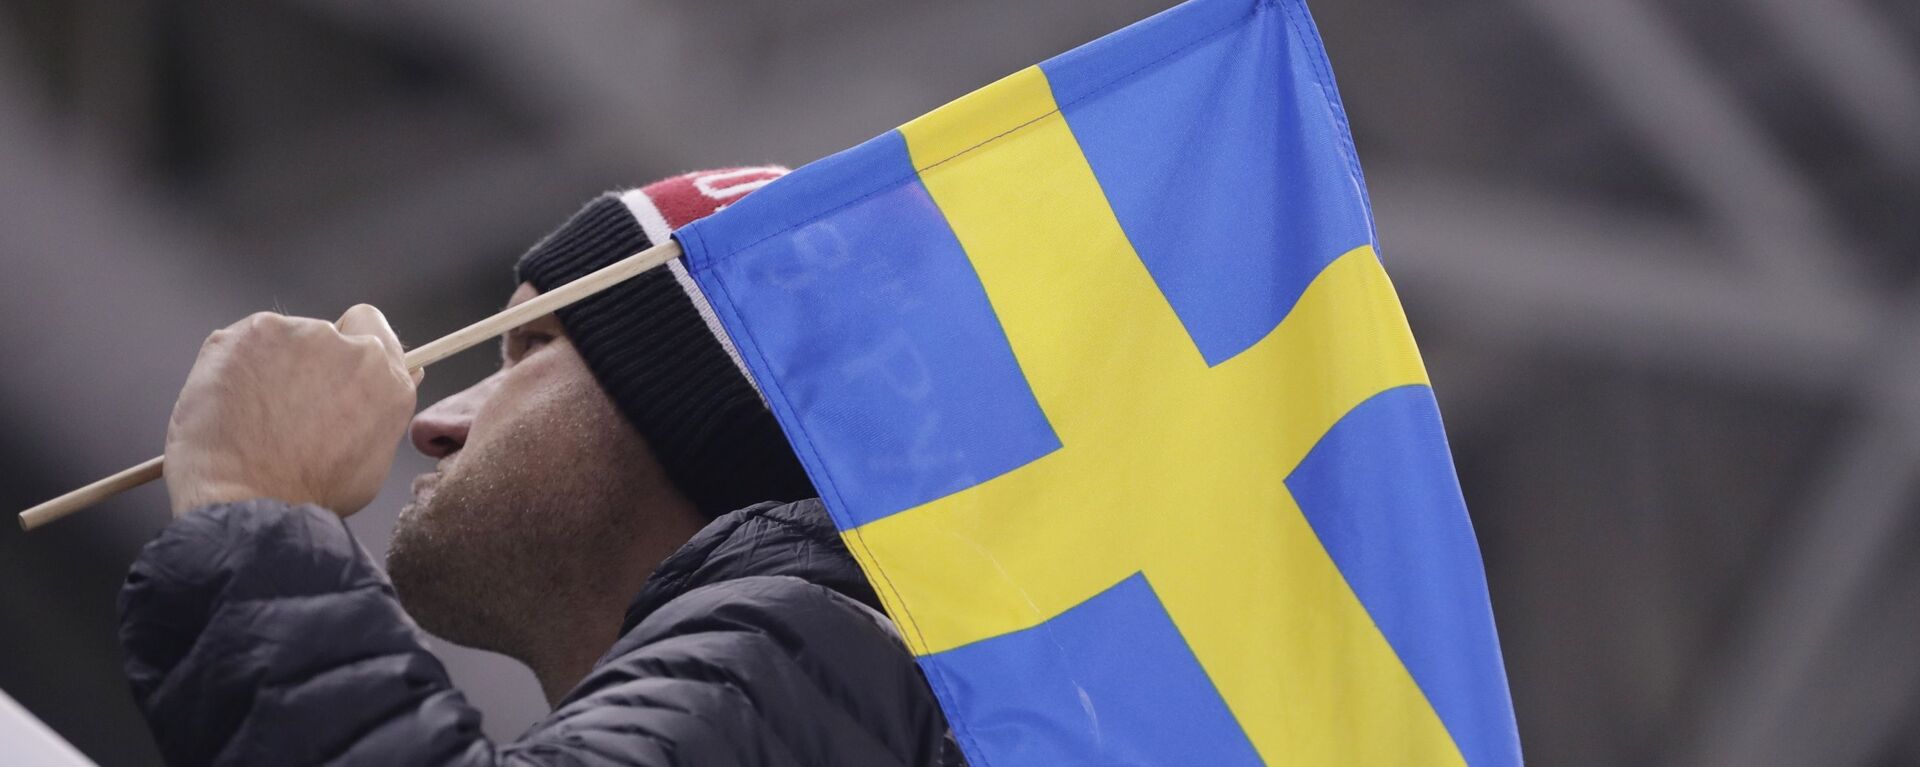 A man poses with a Swedish flag before the preliminary round of the men's hockey game between Sweden and Finland at the 2018 Winter Olympics in Gangneung, South Korea, Sunday, Feb. 18, 2018 - Sputnik International, 1920, 11.02.2021